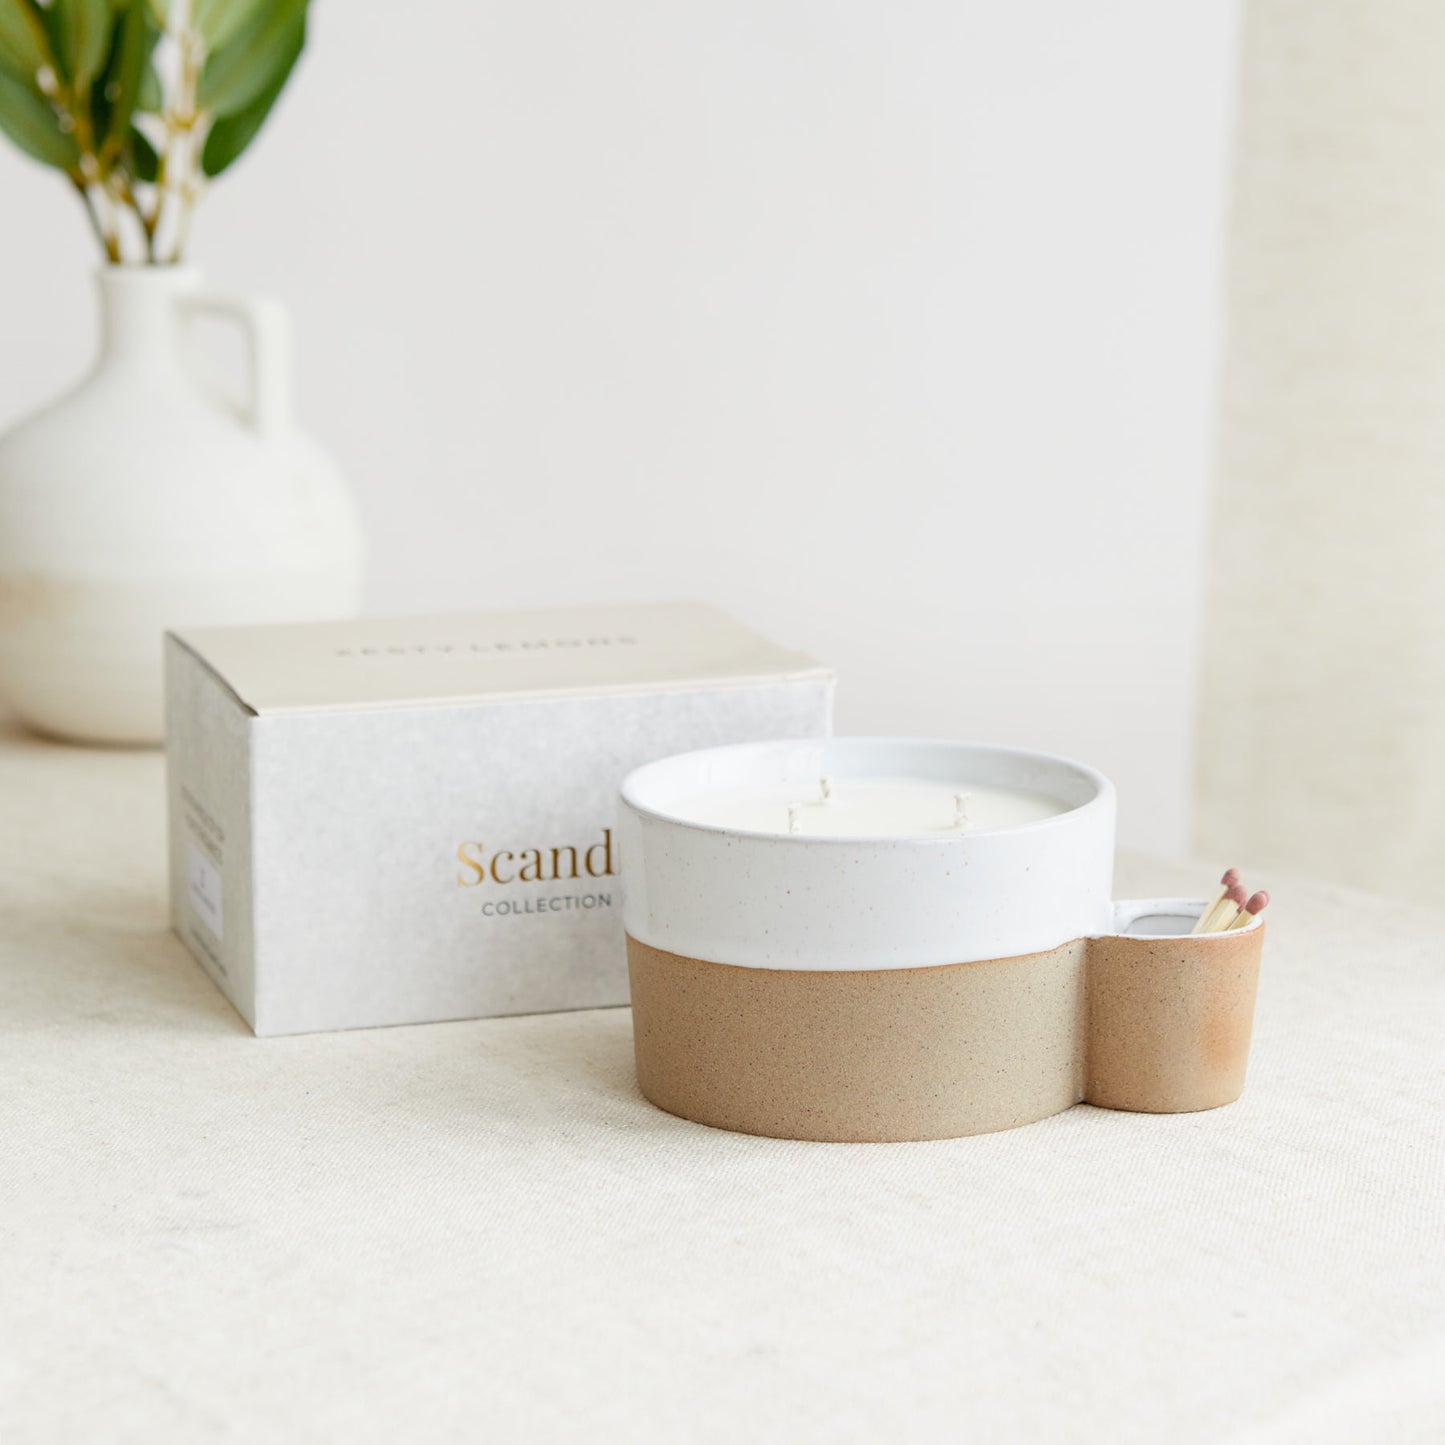 Scandi: Two Toned Ceramic Candle with Match Holder - Lemon & Lavender